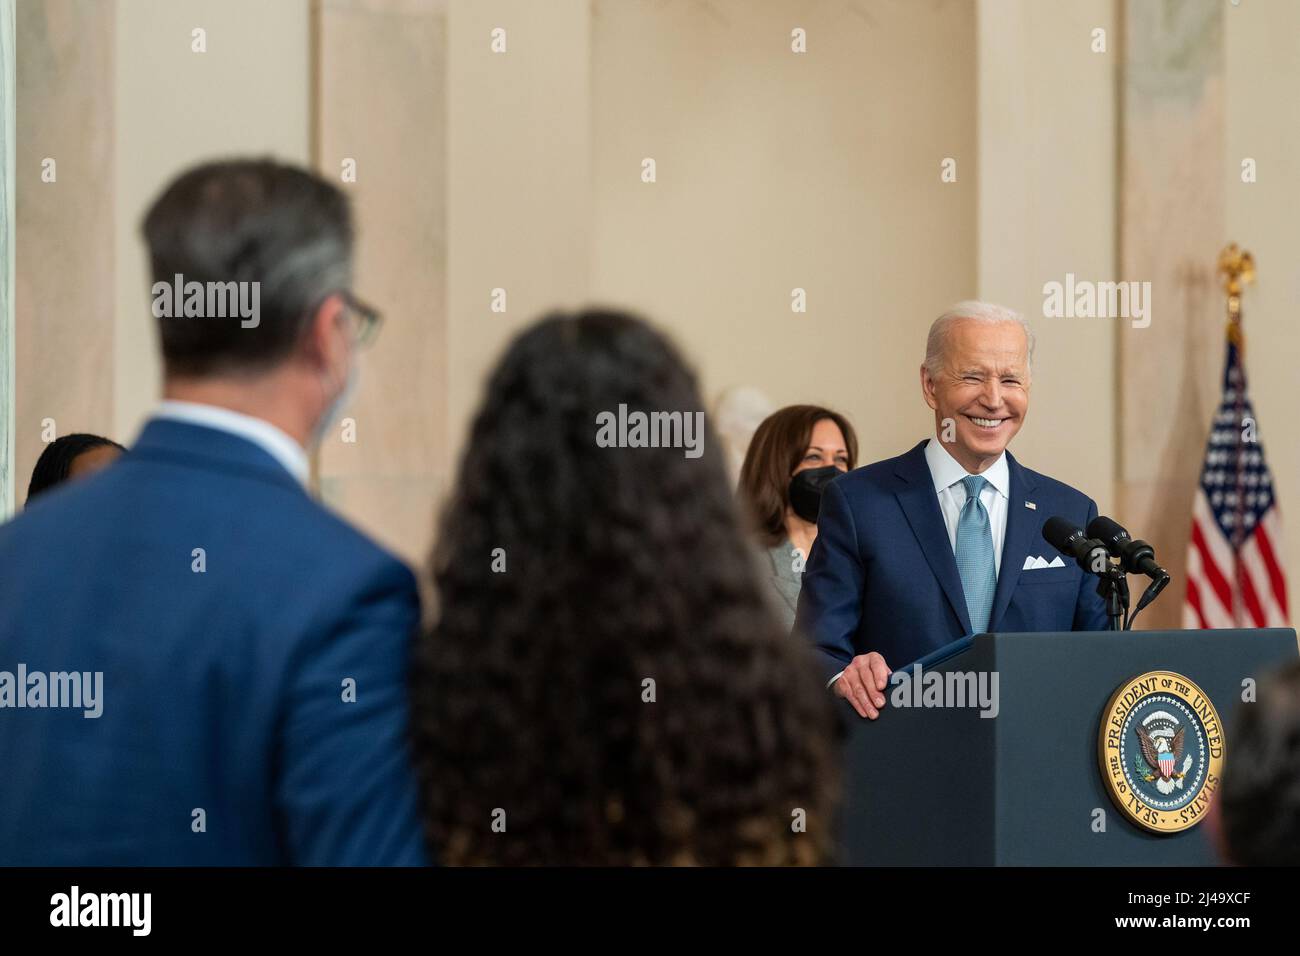 President Joe Biden smiles at Judge Ketanji Brown Jackson’s husband and daughter as he announces her nomination to the U.S. Supreme Court, Friday, February 25, 2022, in the Grand Foyer of the White House. (Official White House Photo by Cameron Smith) Stock Photo